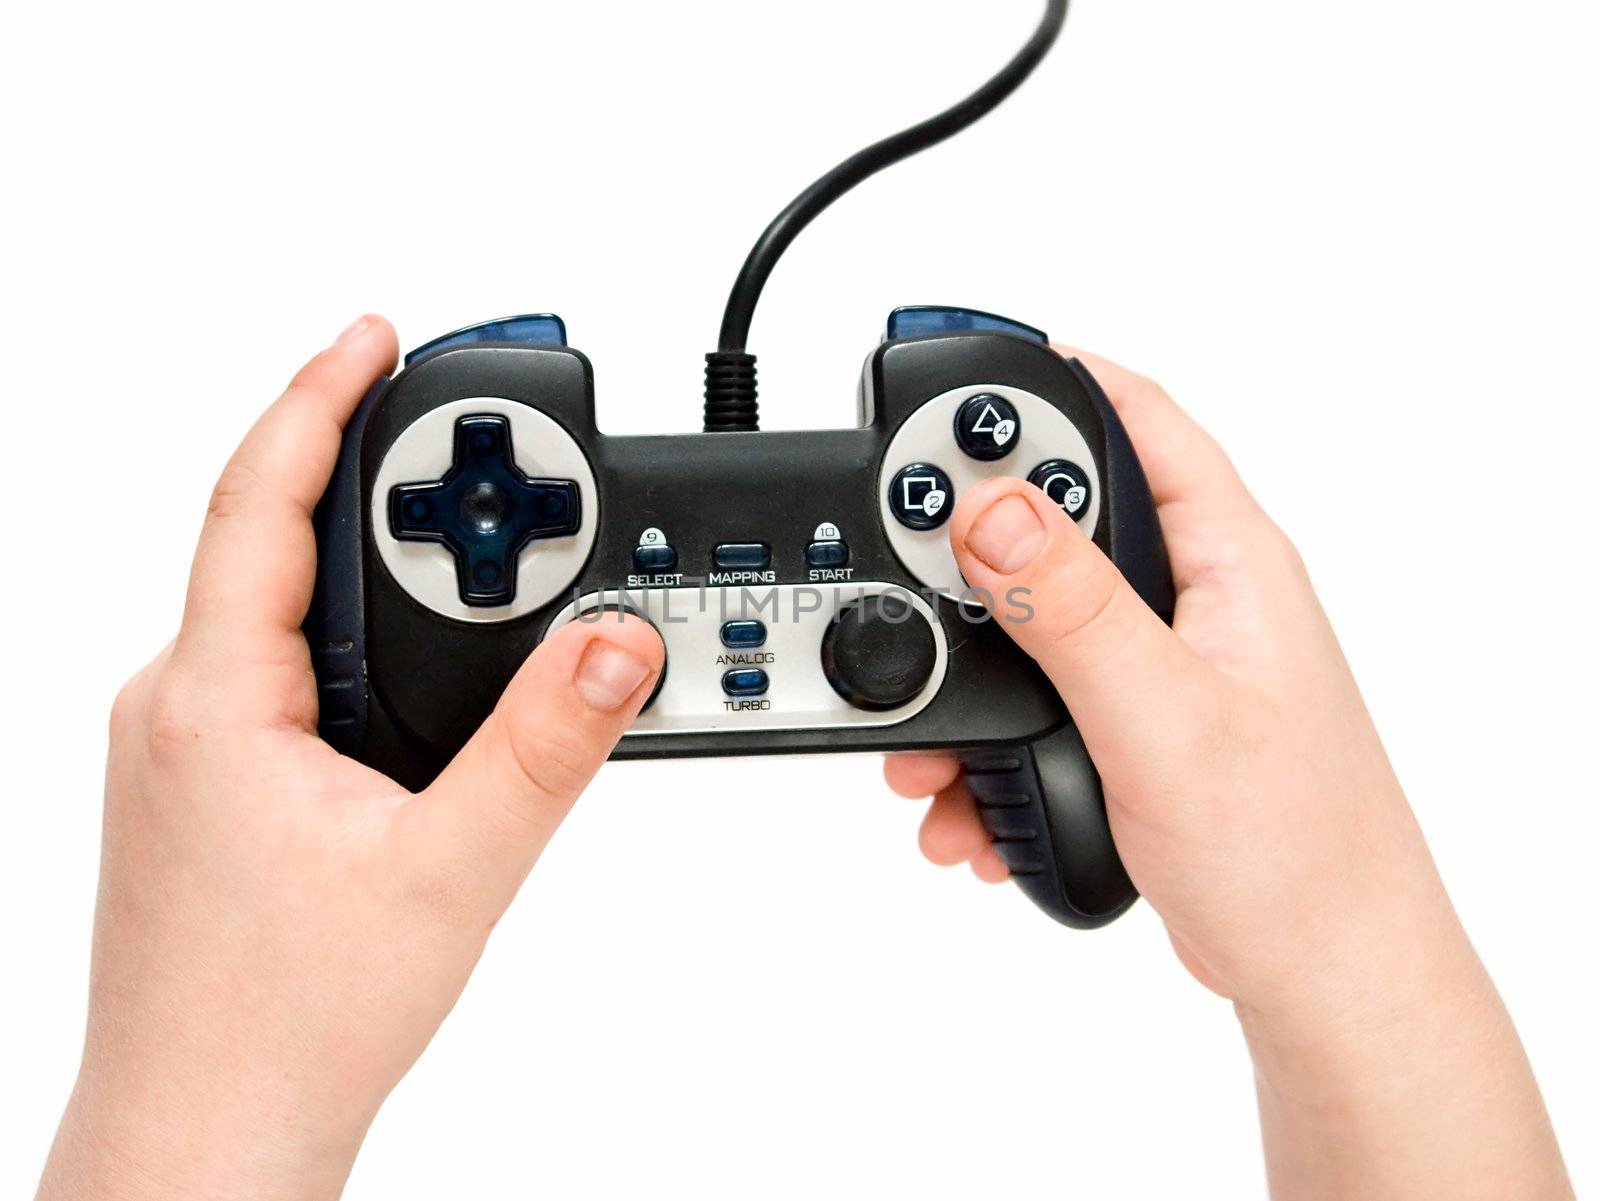 The gamepad in hands on a white background